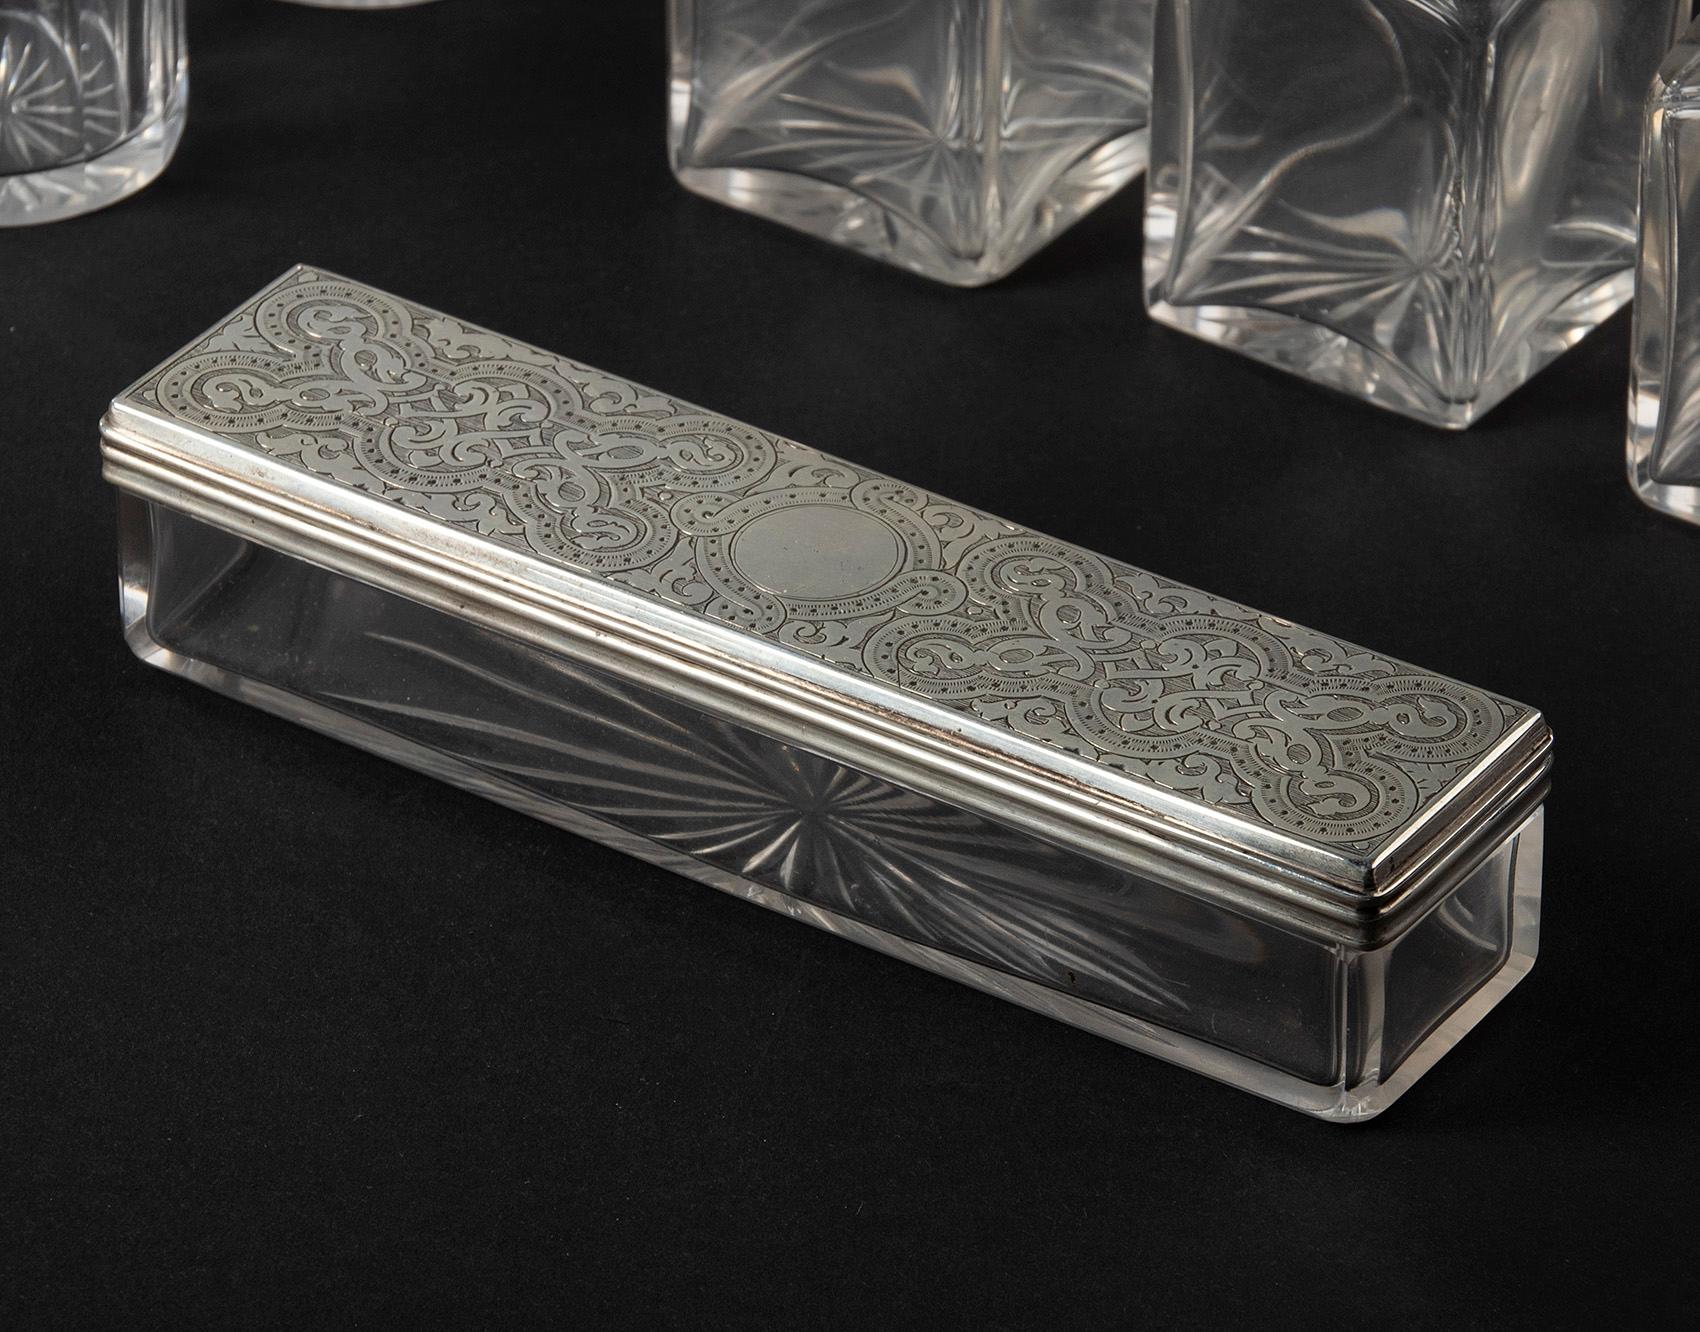 English Vanity Case with Crystal Boxes and Sterling Silver Lids by George Betjemann 1870 For Sale